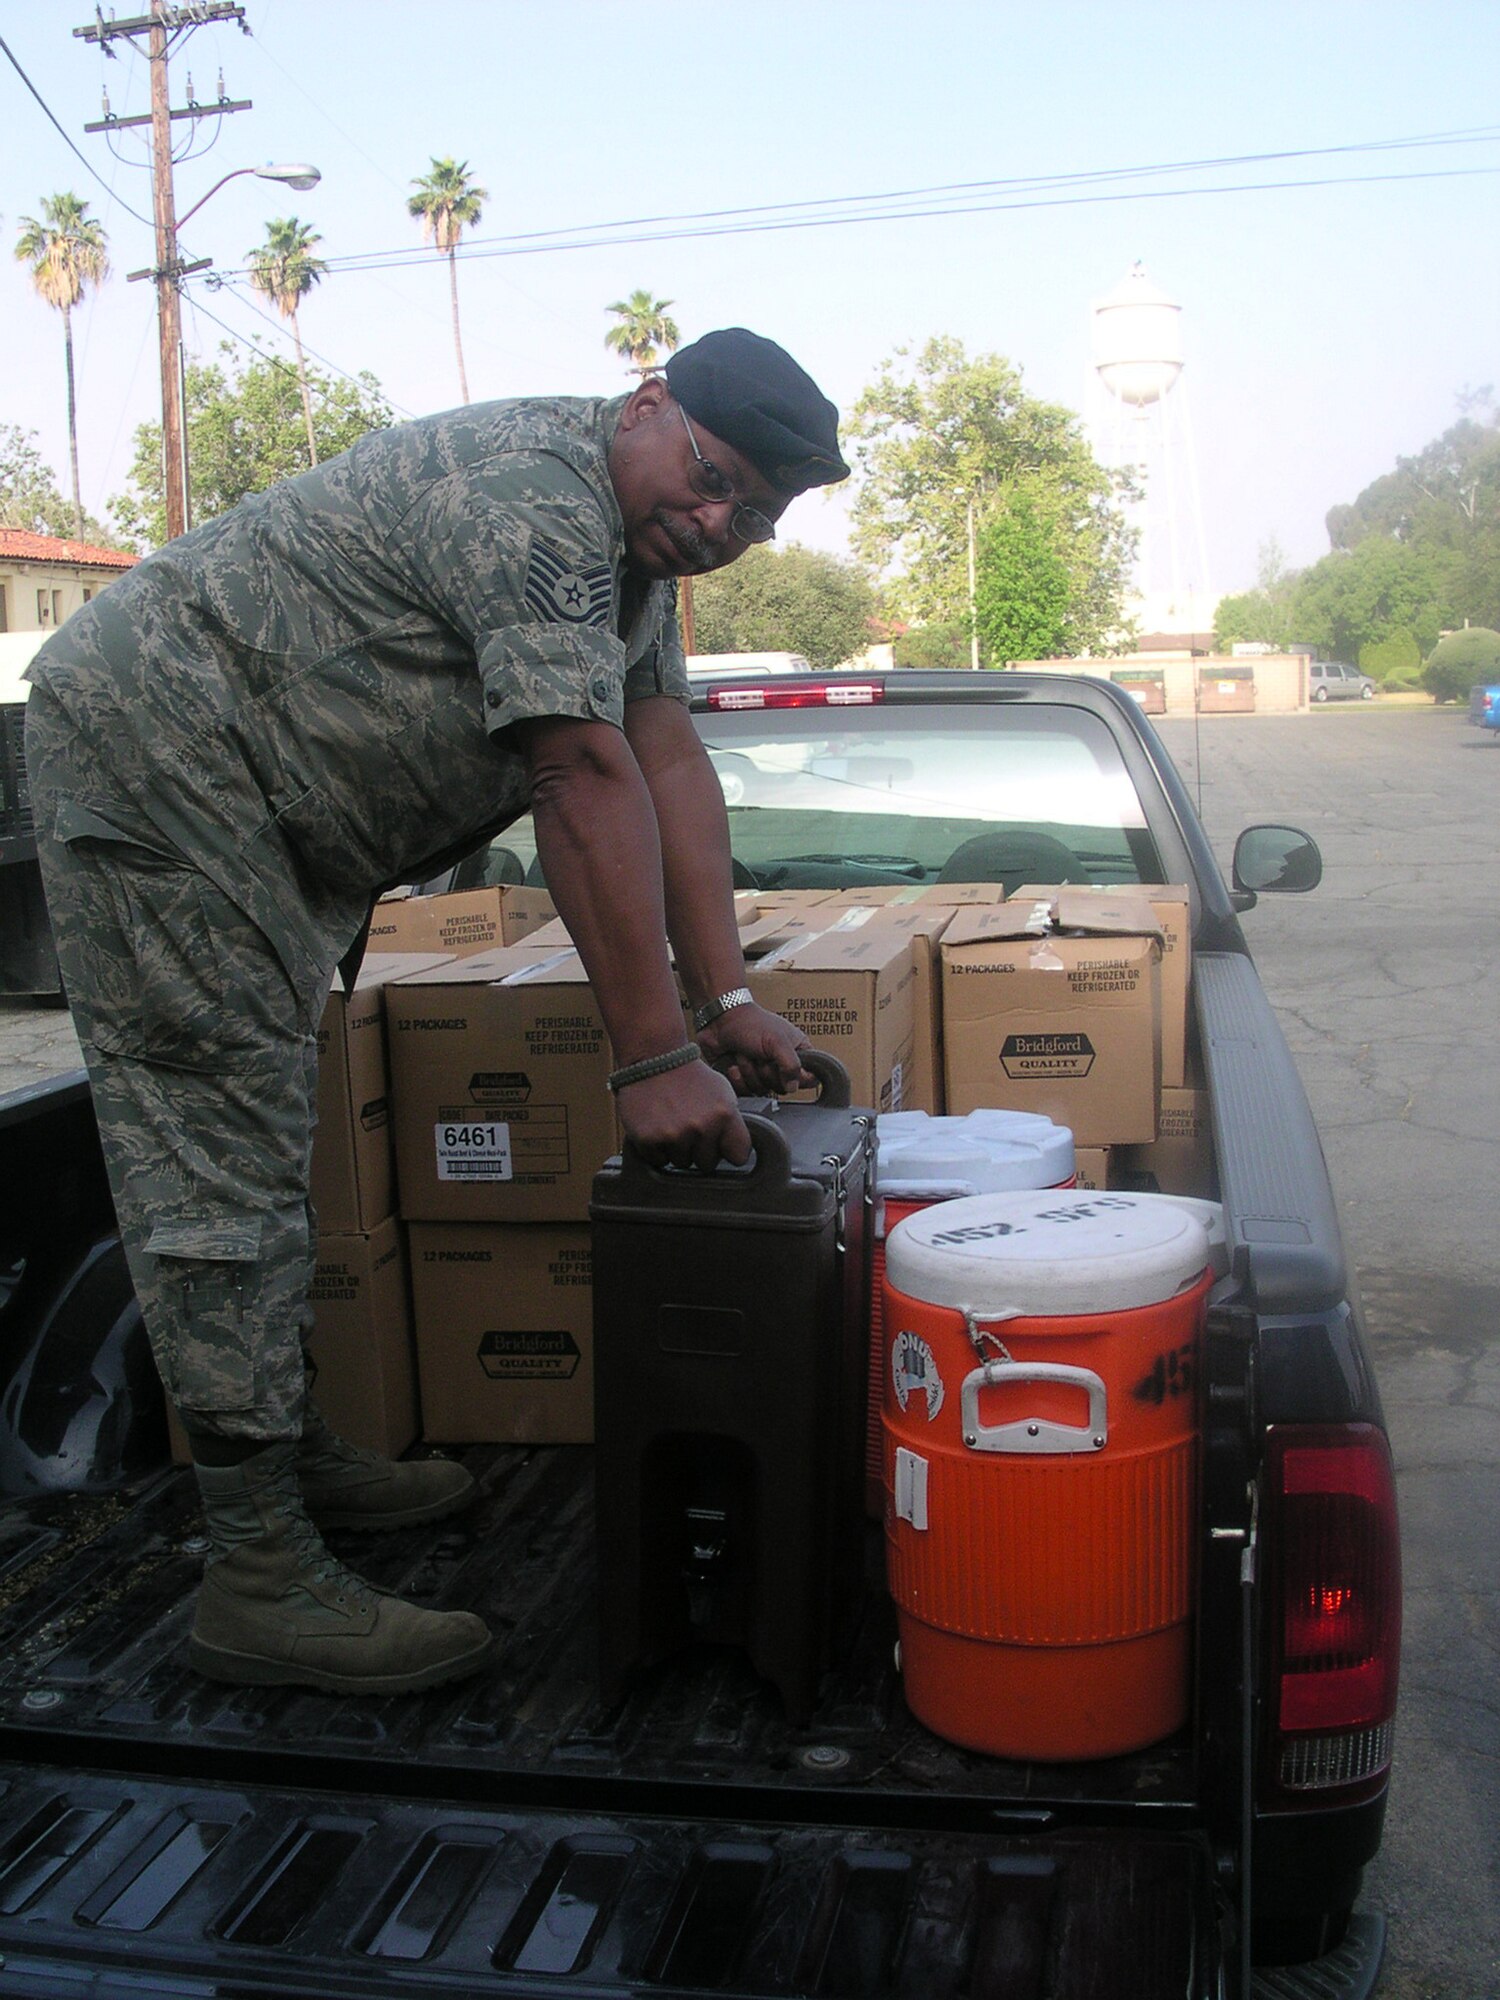 WRIGHT-PATTERSON AFB, Ohio - Tech Sgt. Mike Pennington, 445th Security Forces Squadron, off-loads food and drink for the troops during the Thunder Over the Empire Air Show at March Air Reserve Base, Calif. (Courtesy photo) 